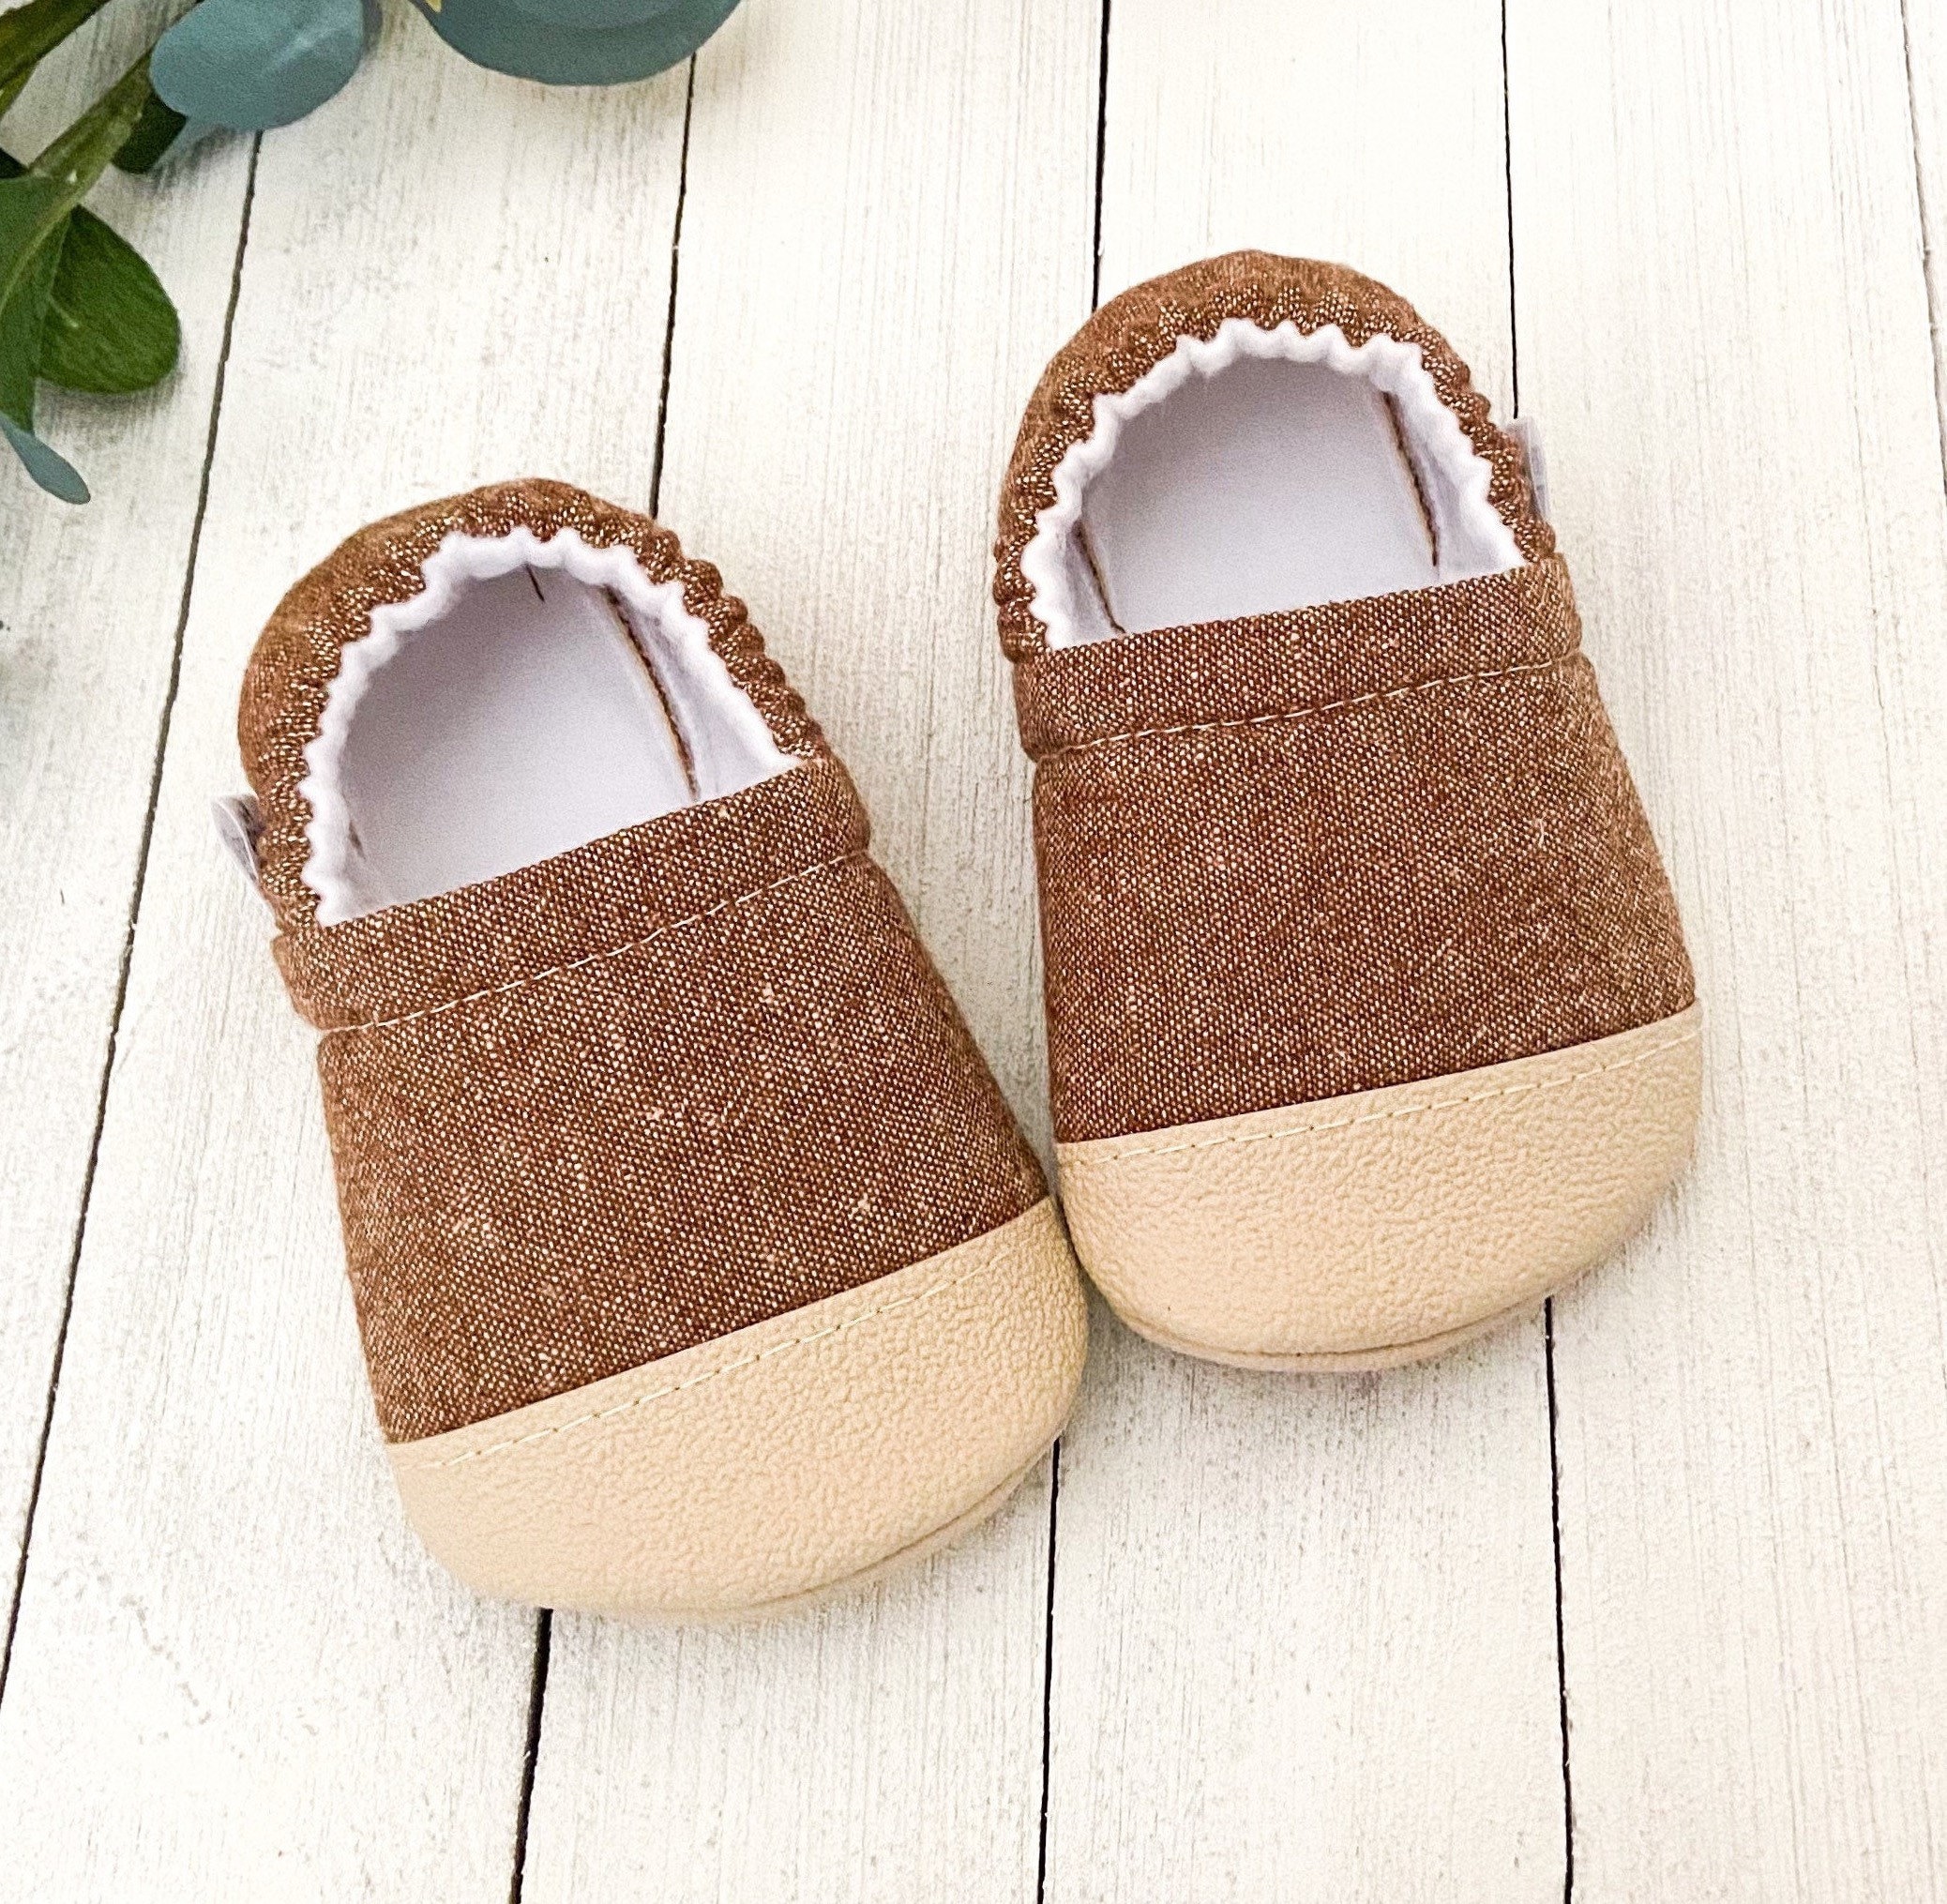 Nutmeg Linen Blend Baby Booties, Slippers, Crib Shoes, Soft Sole, Moccasins, Shoes